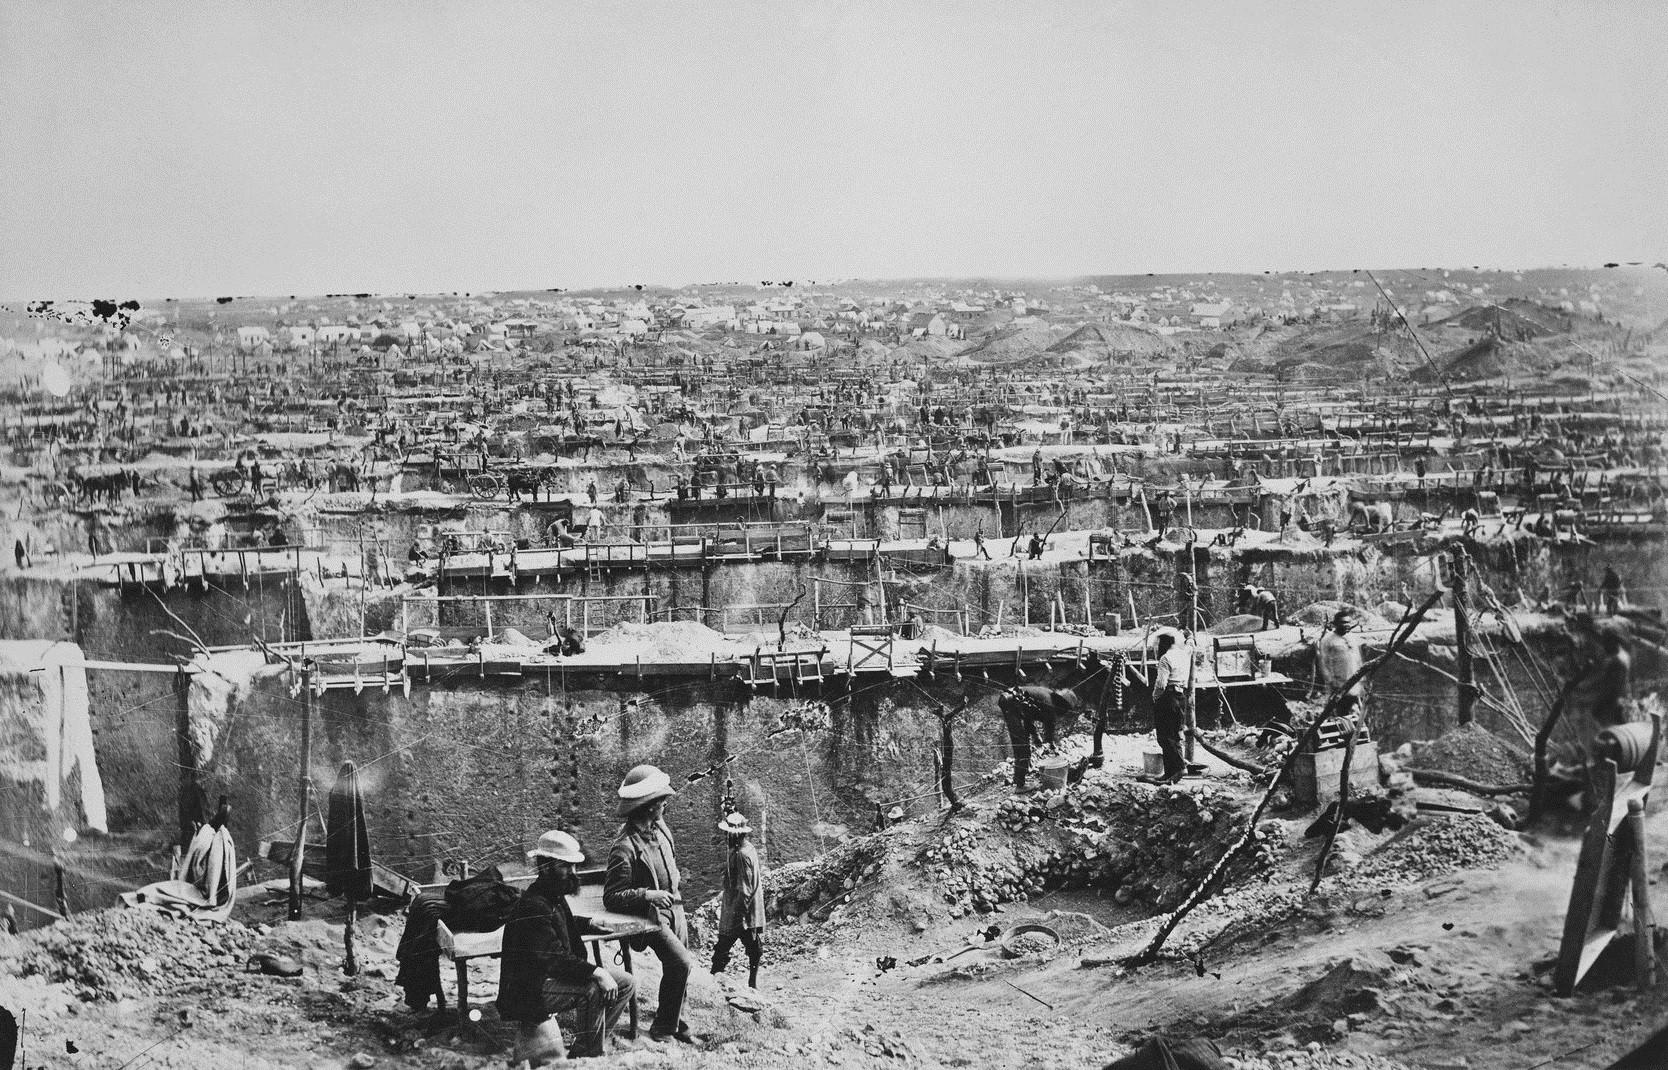 The Kimberley Diamond mine in South Africa in 1872. After a massive 83.5 carat diamond was found here, fortune hunters flocked to the area, with 800 land claims made near the mine. Similar to American gold rush towns, the mines would be heavily worked, and the claims would be bought up by bigger businesses, cutting the workers out of the fortunes of any diamond discoveries. The conditions were poor at times, and workers sometimes died.  In reality, if all the diamonds mined in the last 150 years were on the market, even the top quality ones would cost no more than a nice pair of shoes.